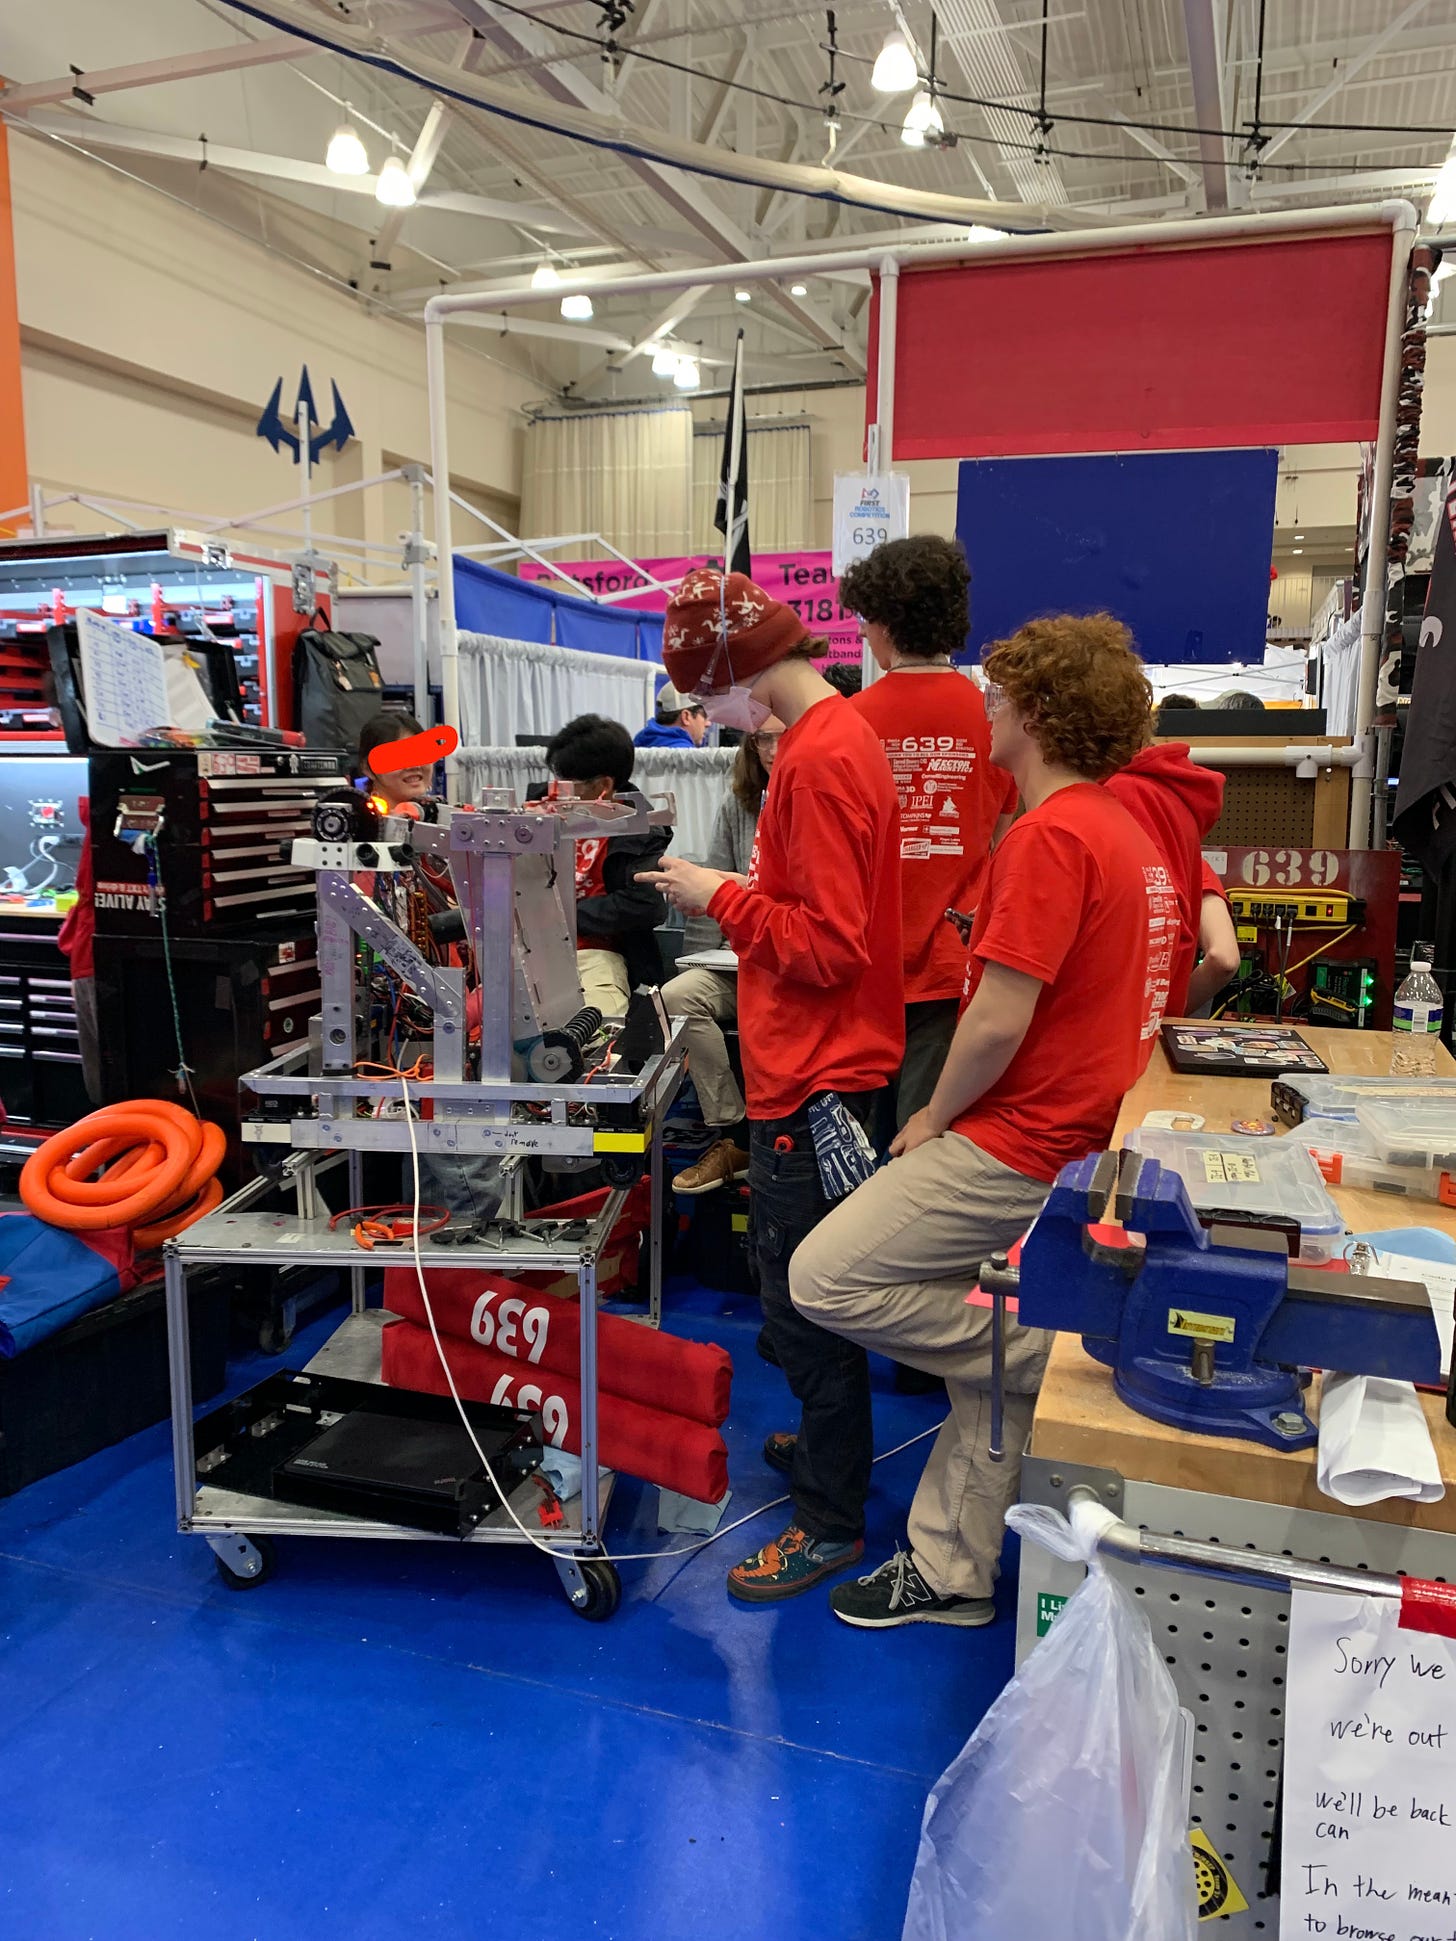 high school students in red t-shirts stand around a robot in the middle of a bustling arrangment of booths full of students fixing robots